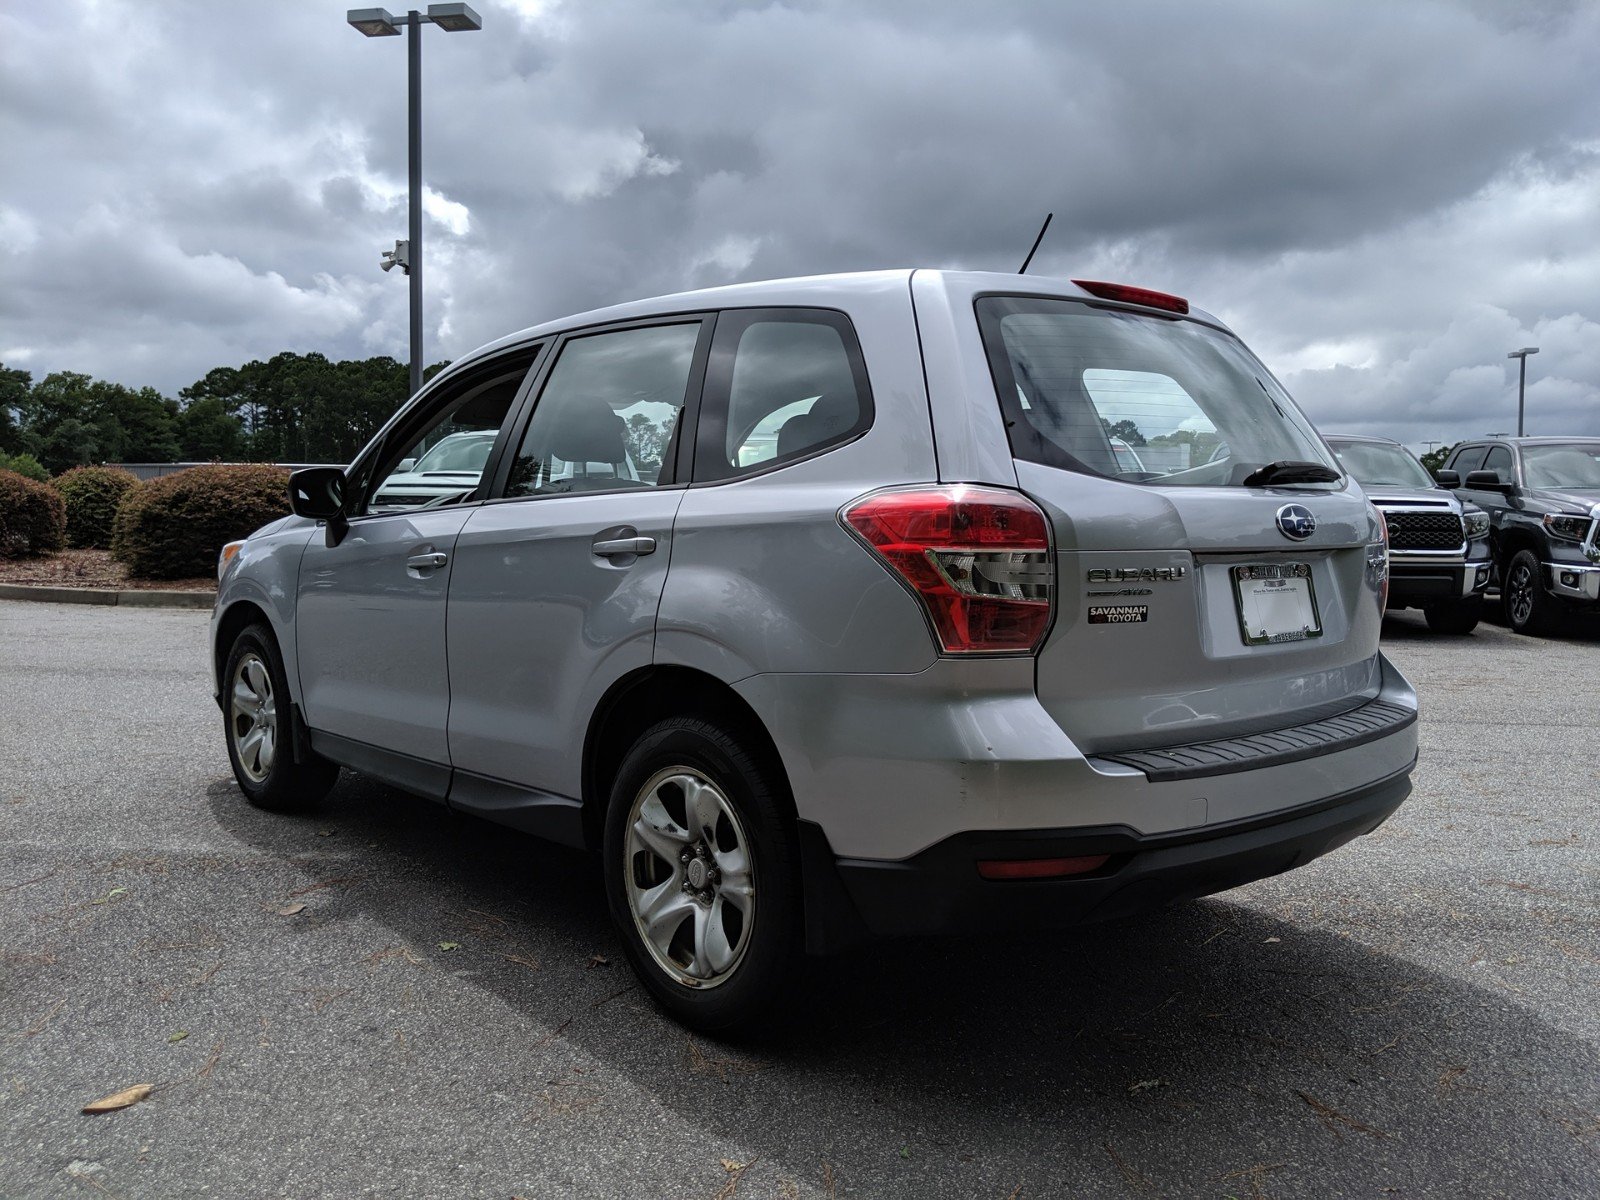 PreOwned 2014 Subaru Forester 2.5i Sport Utility in